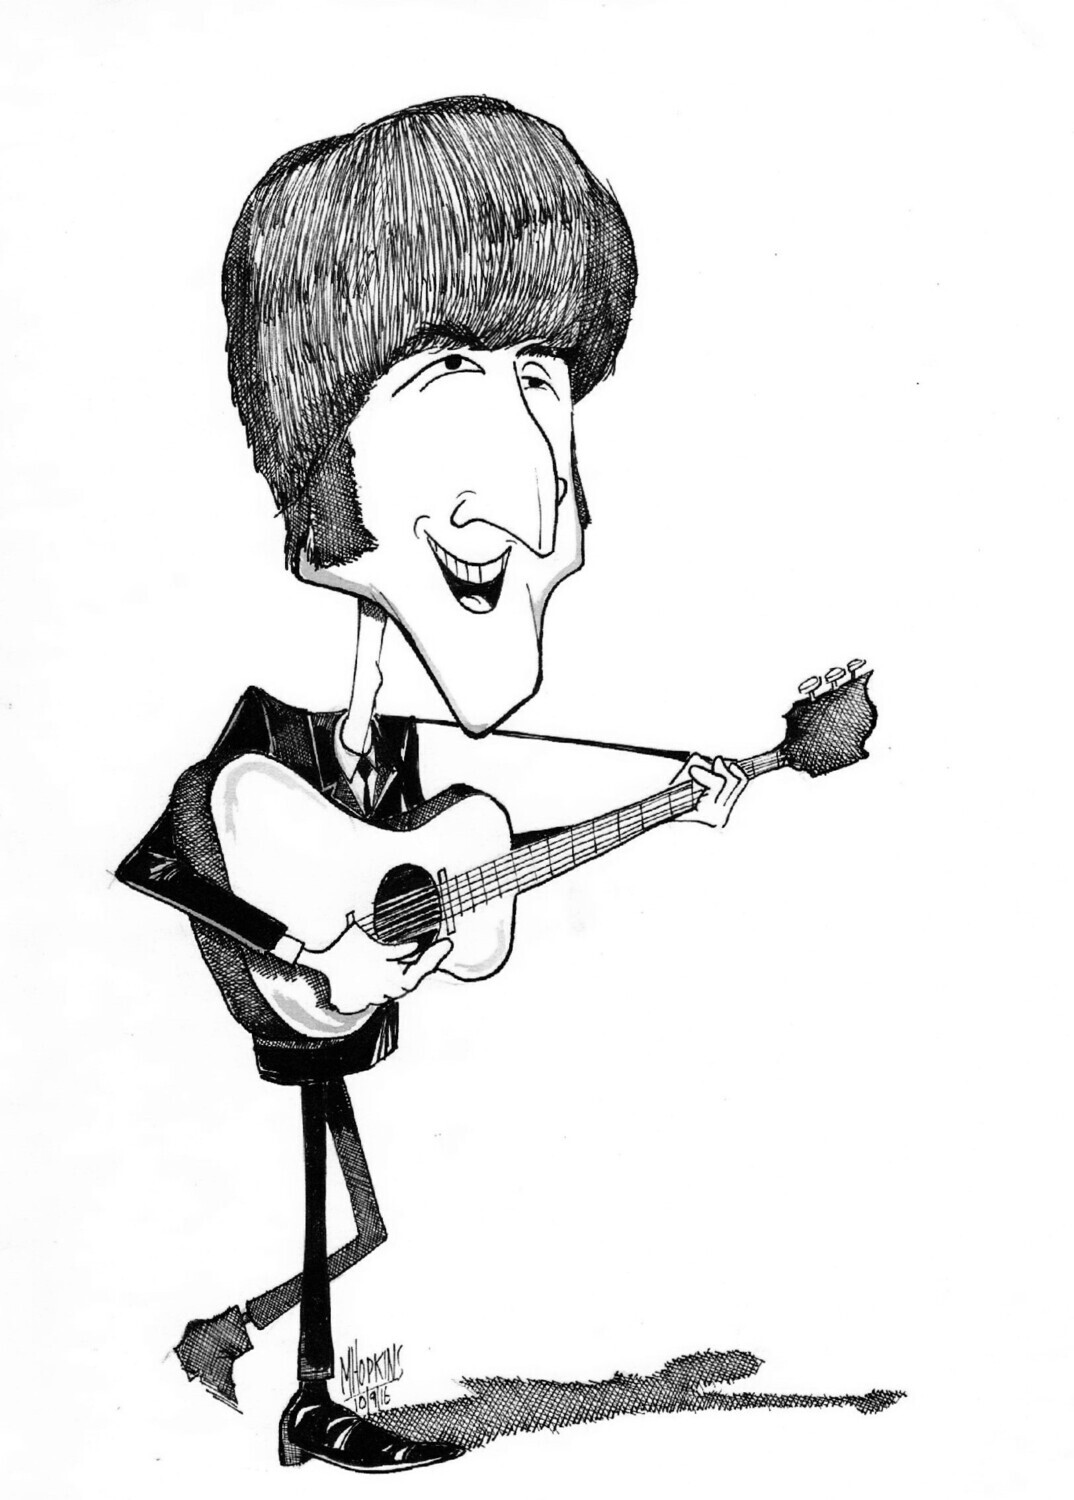 John Lennon - Limited Edition Giclée Prints from $50 to $100